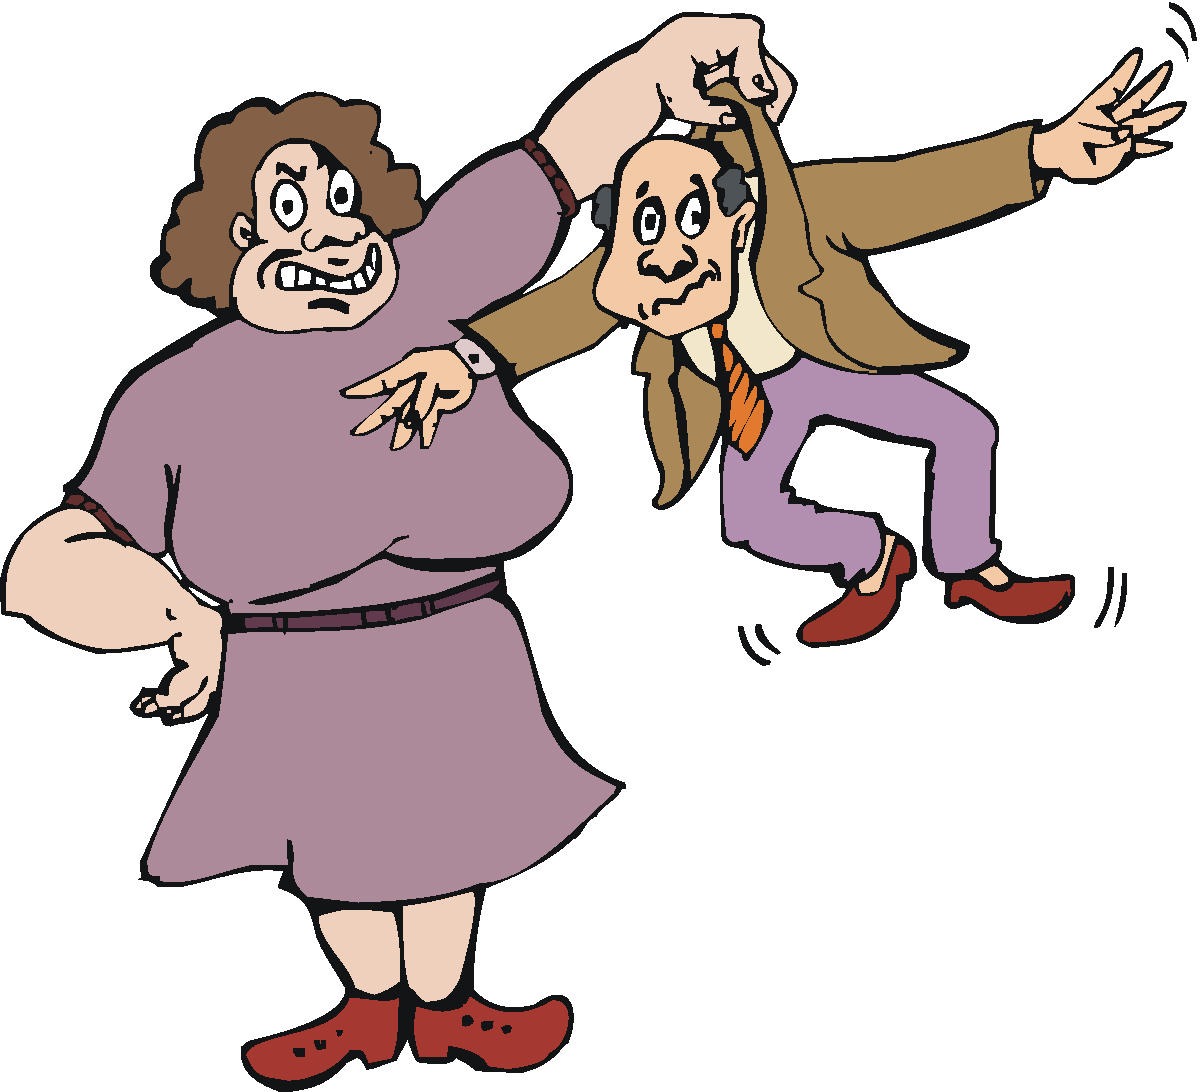 Cartoon Of Big Woman Holding Man By Nape Of The Neck